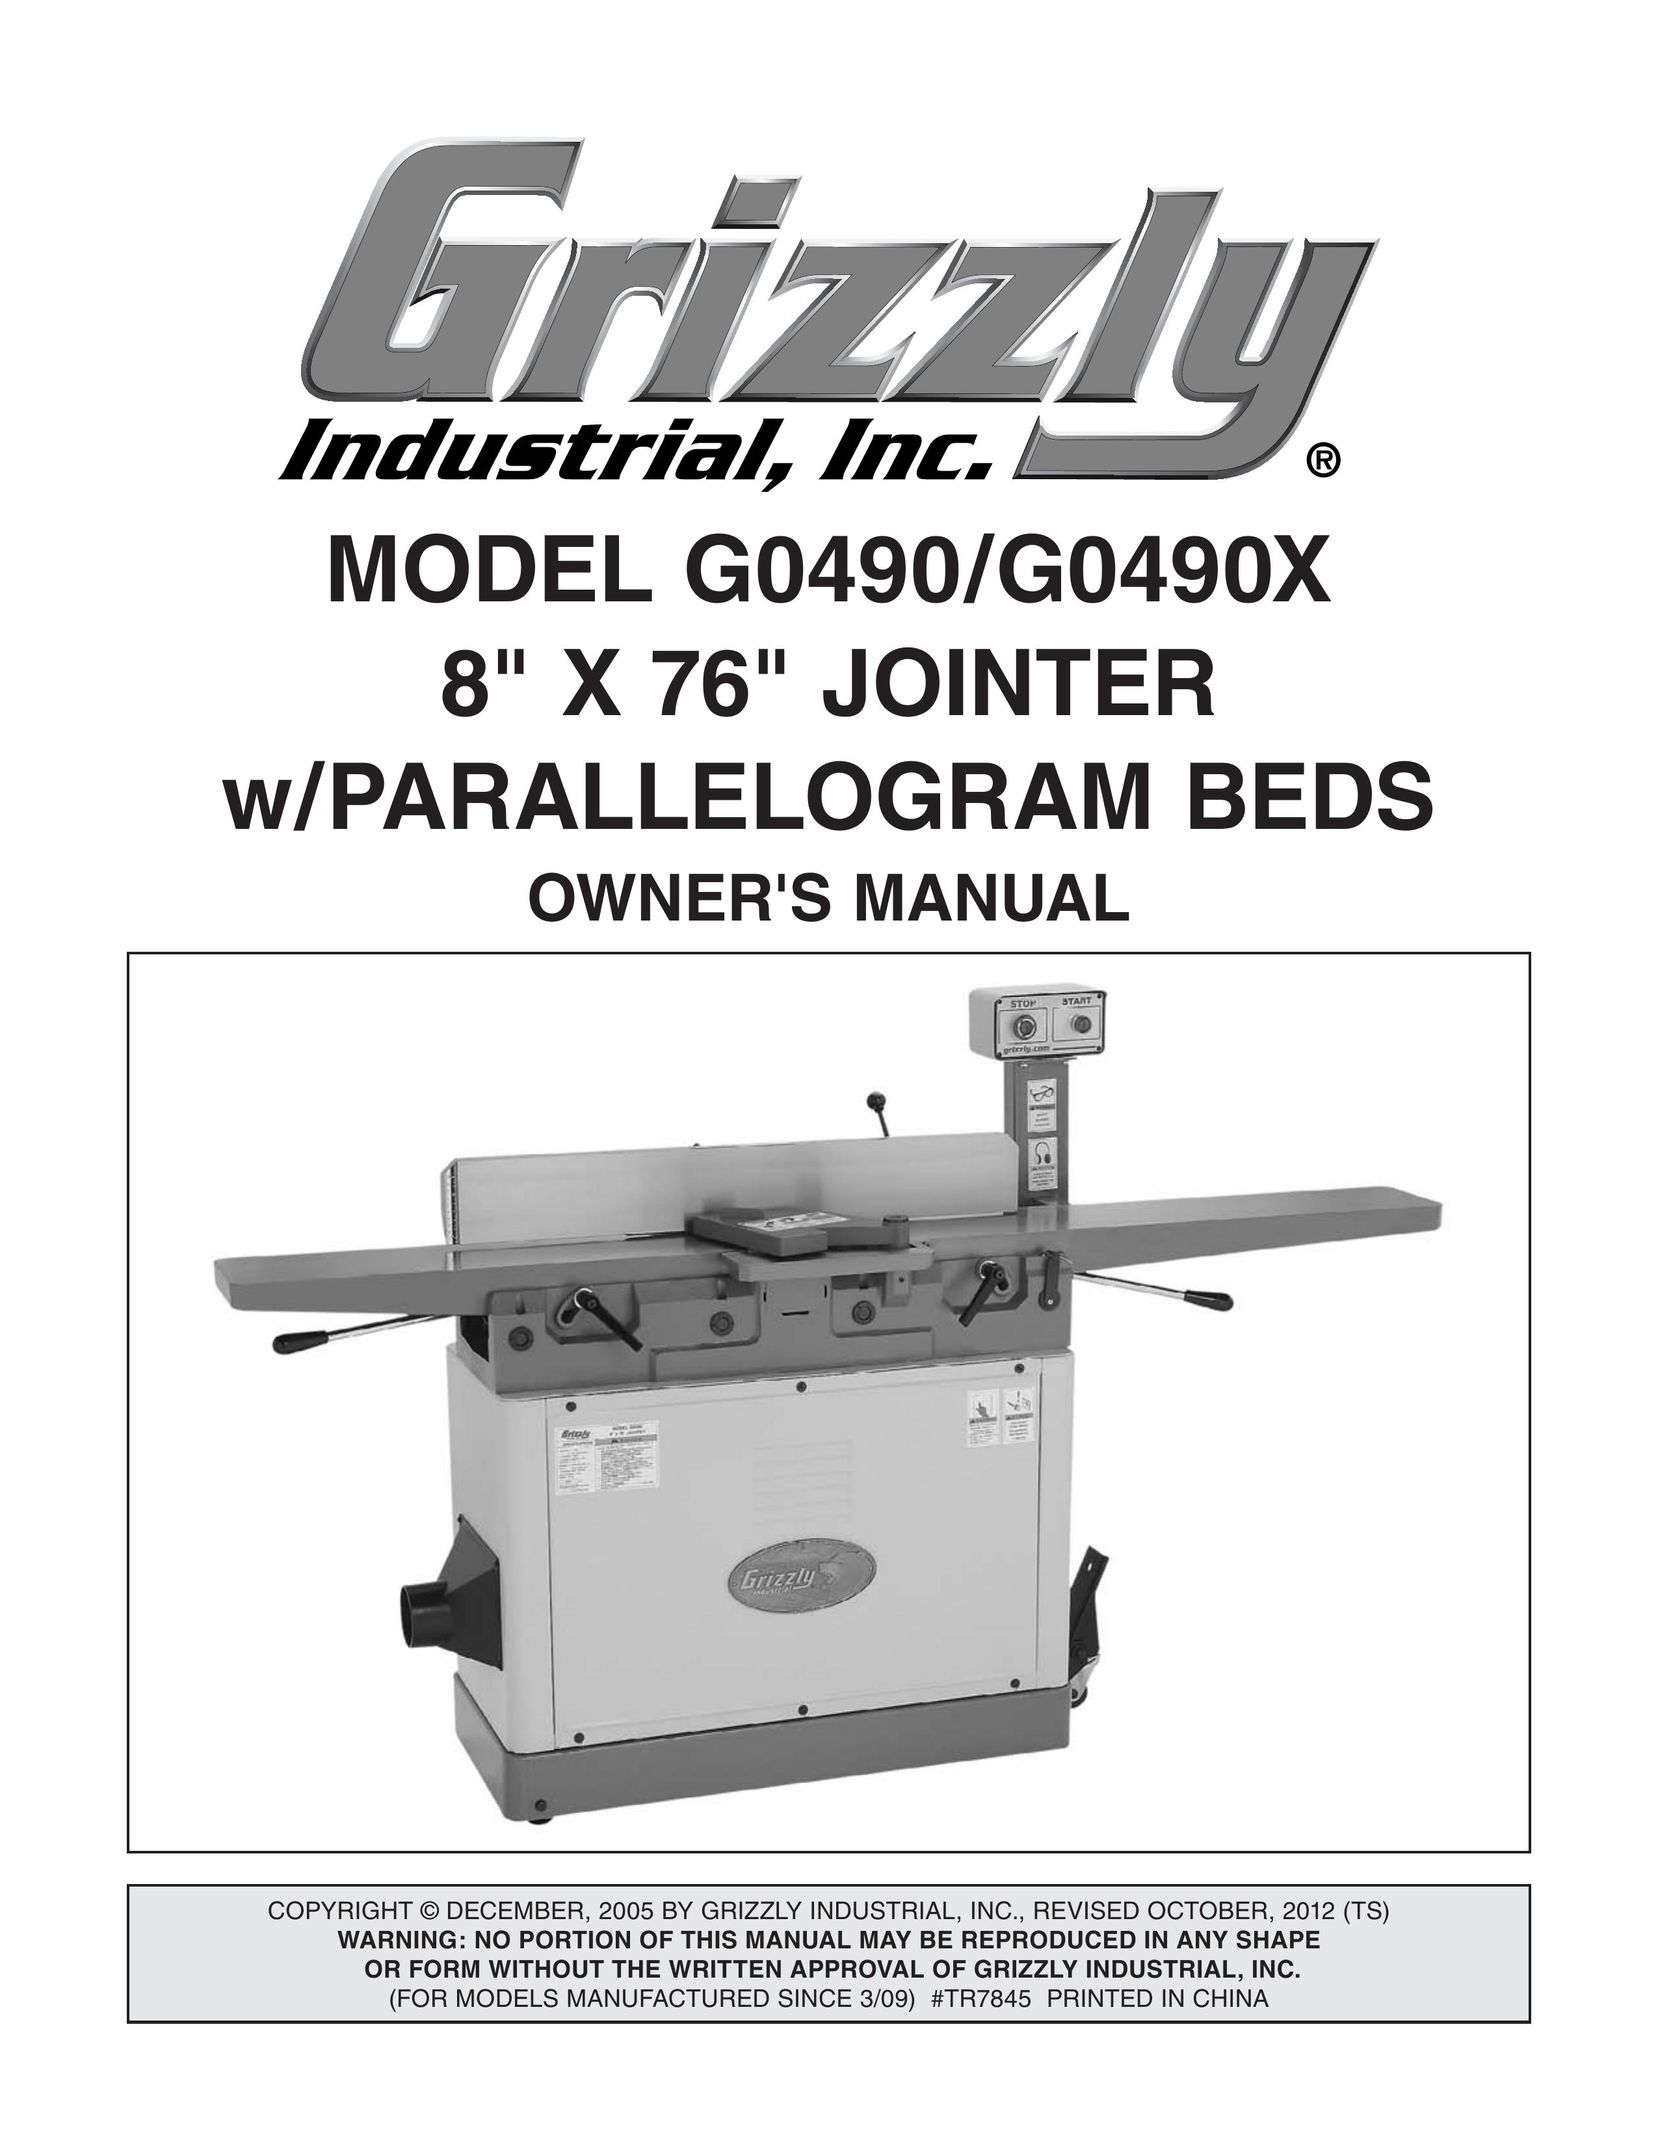 Grizzly G0490 Biscuit Joiner User Manual (Page 1)